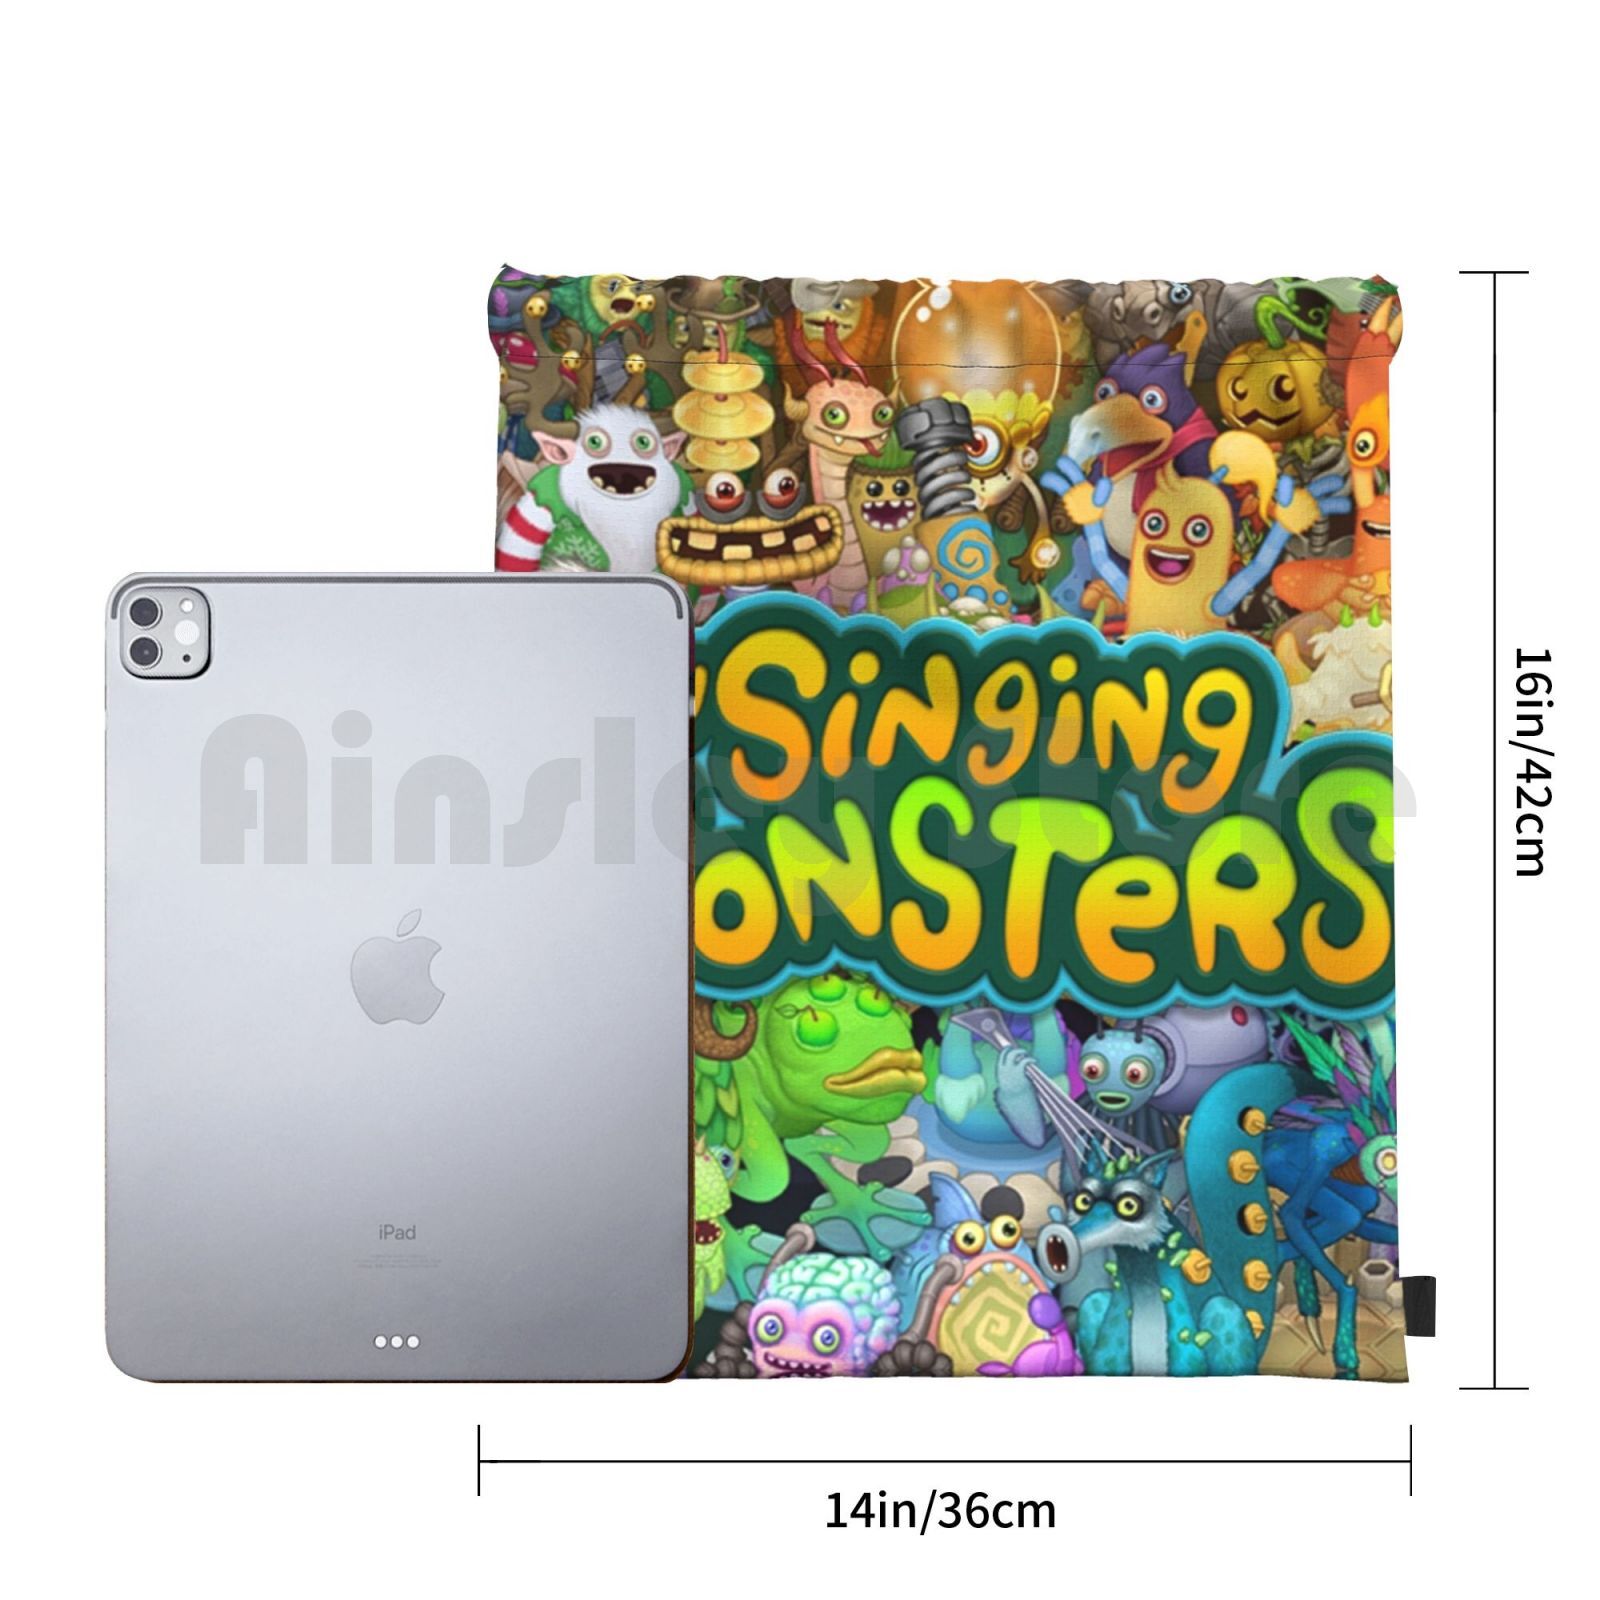 My Singing Monsters Characters And Title Backpack Drawstring Bag Riding Climbing Gym Bag My Singing Monsters 2 - My Singing Monsters Plush